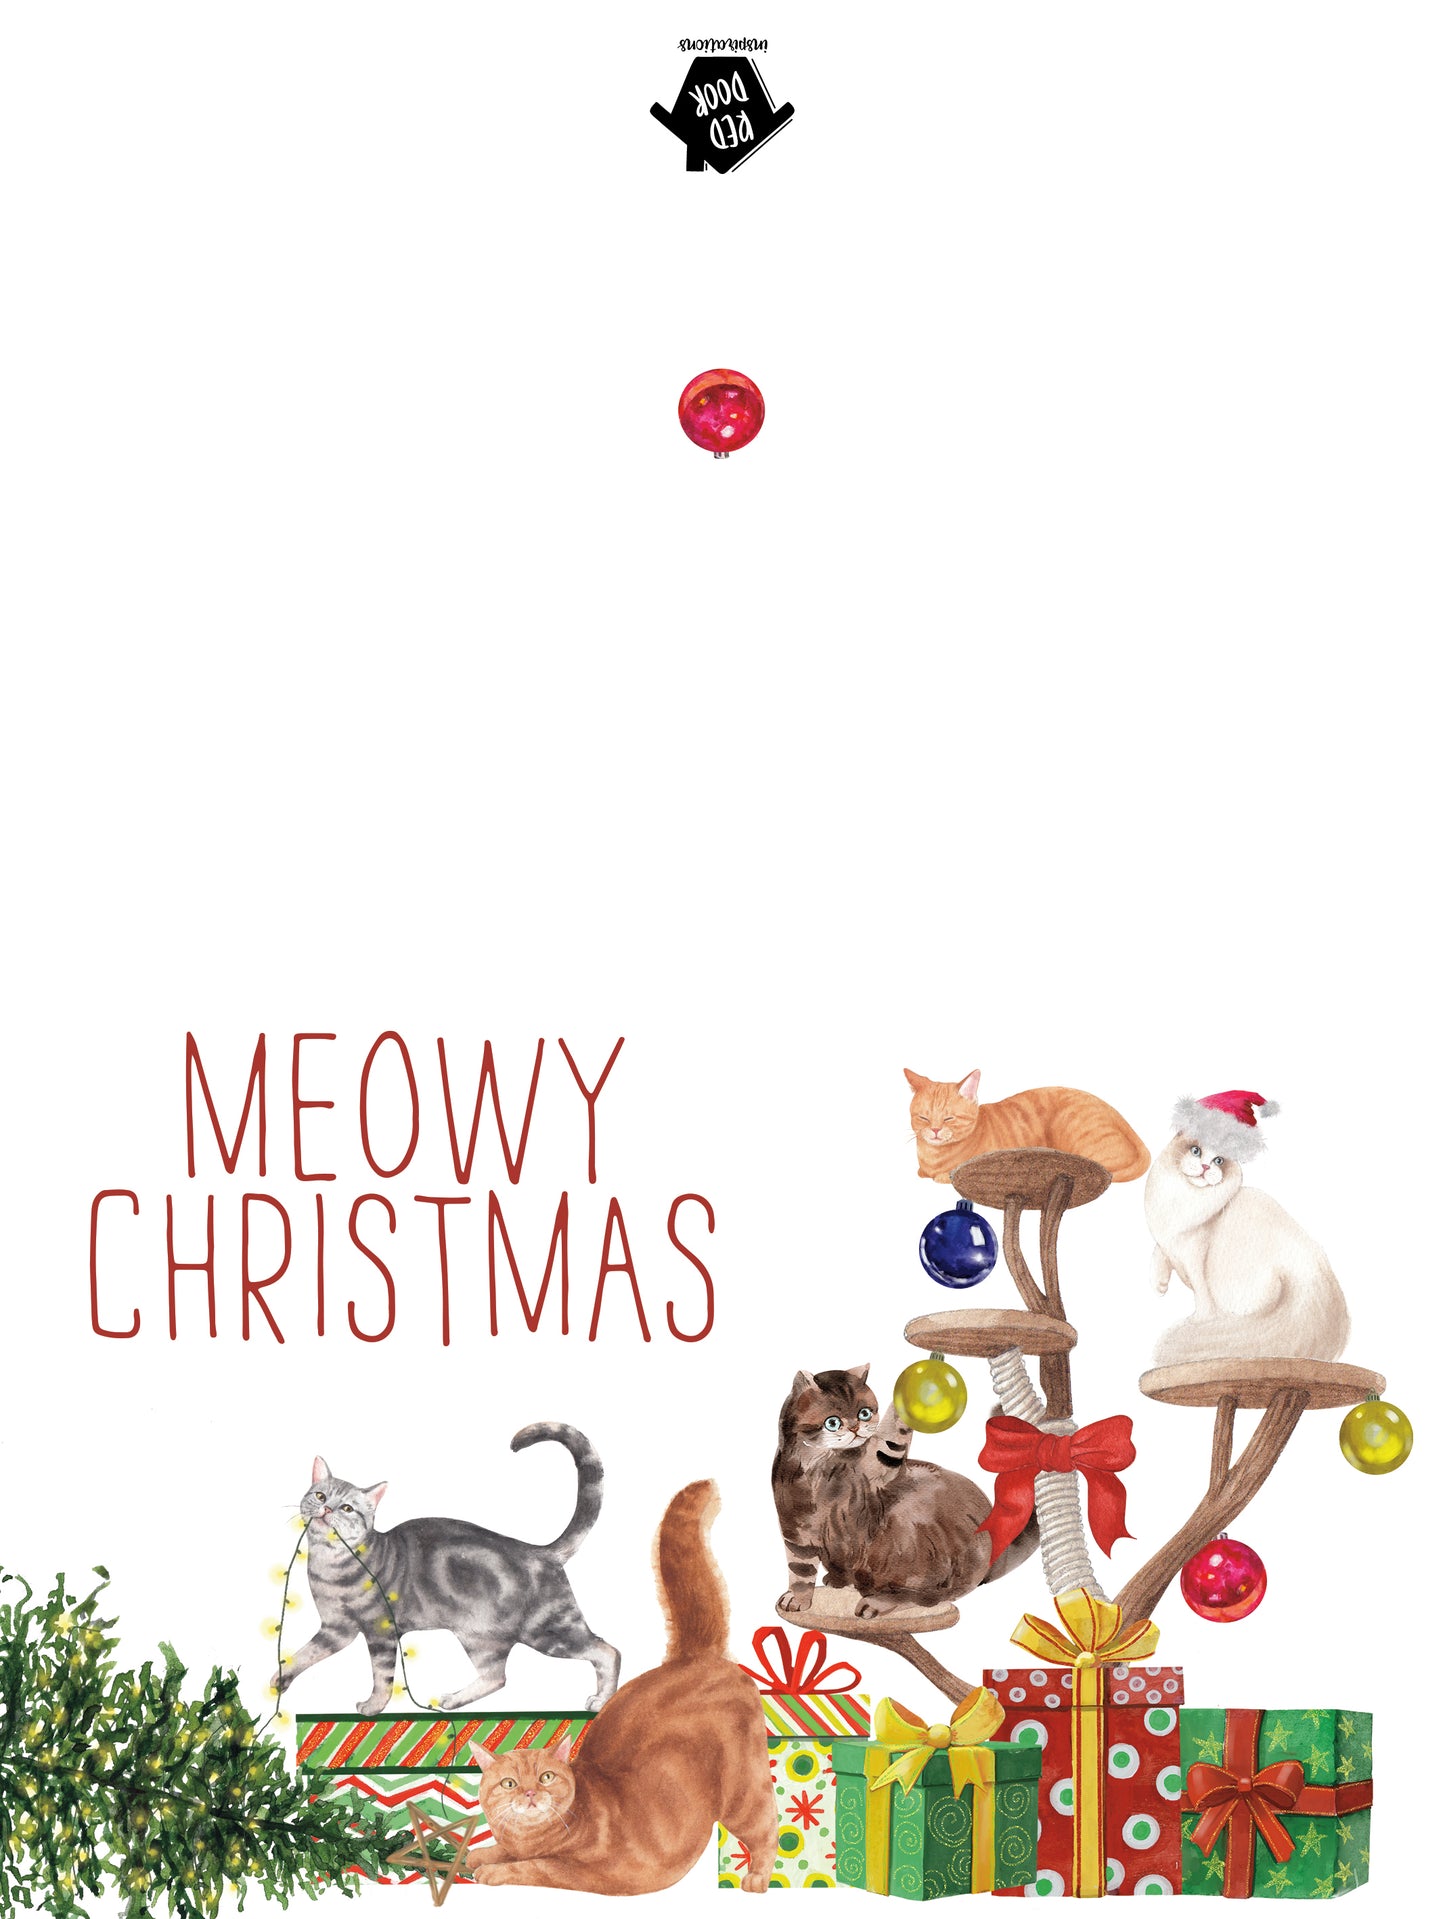 Meowy Christmas - Includes 25 cards